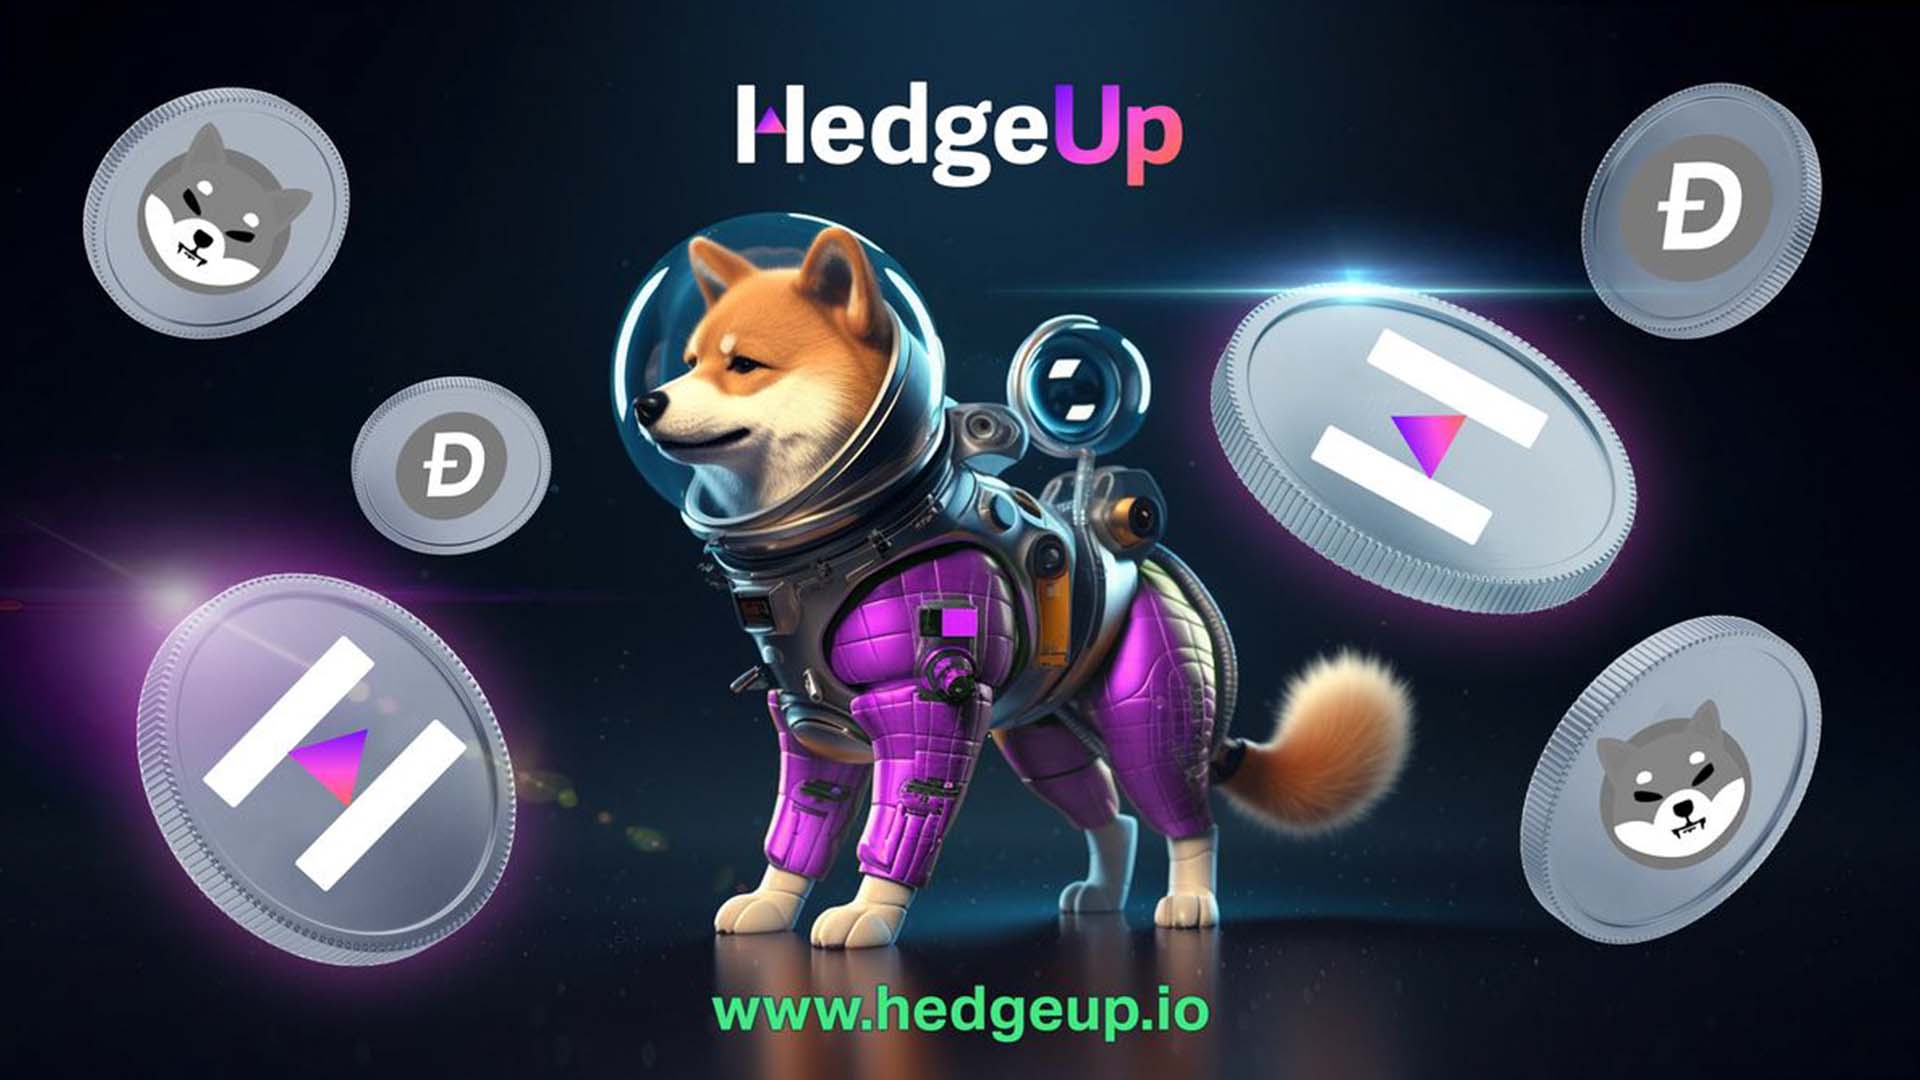 HedgeUp Twitter post